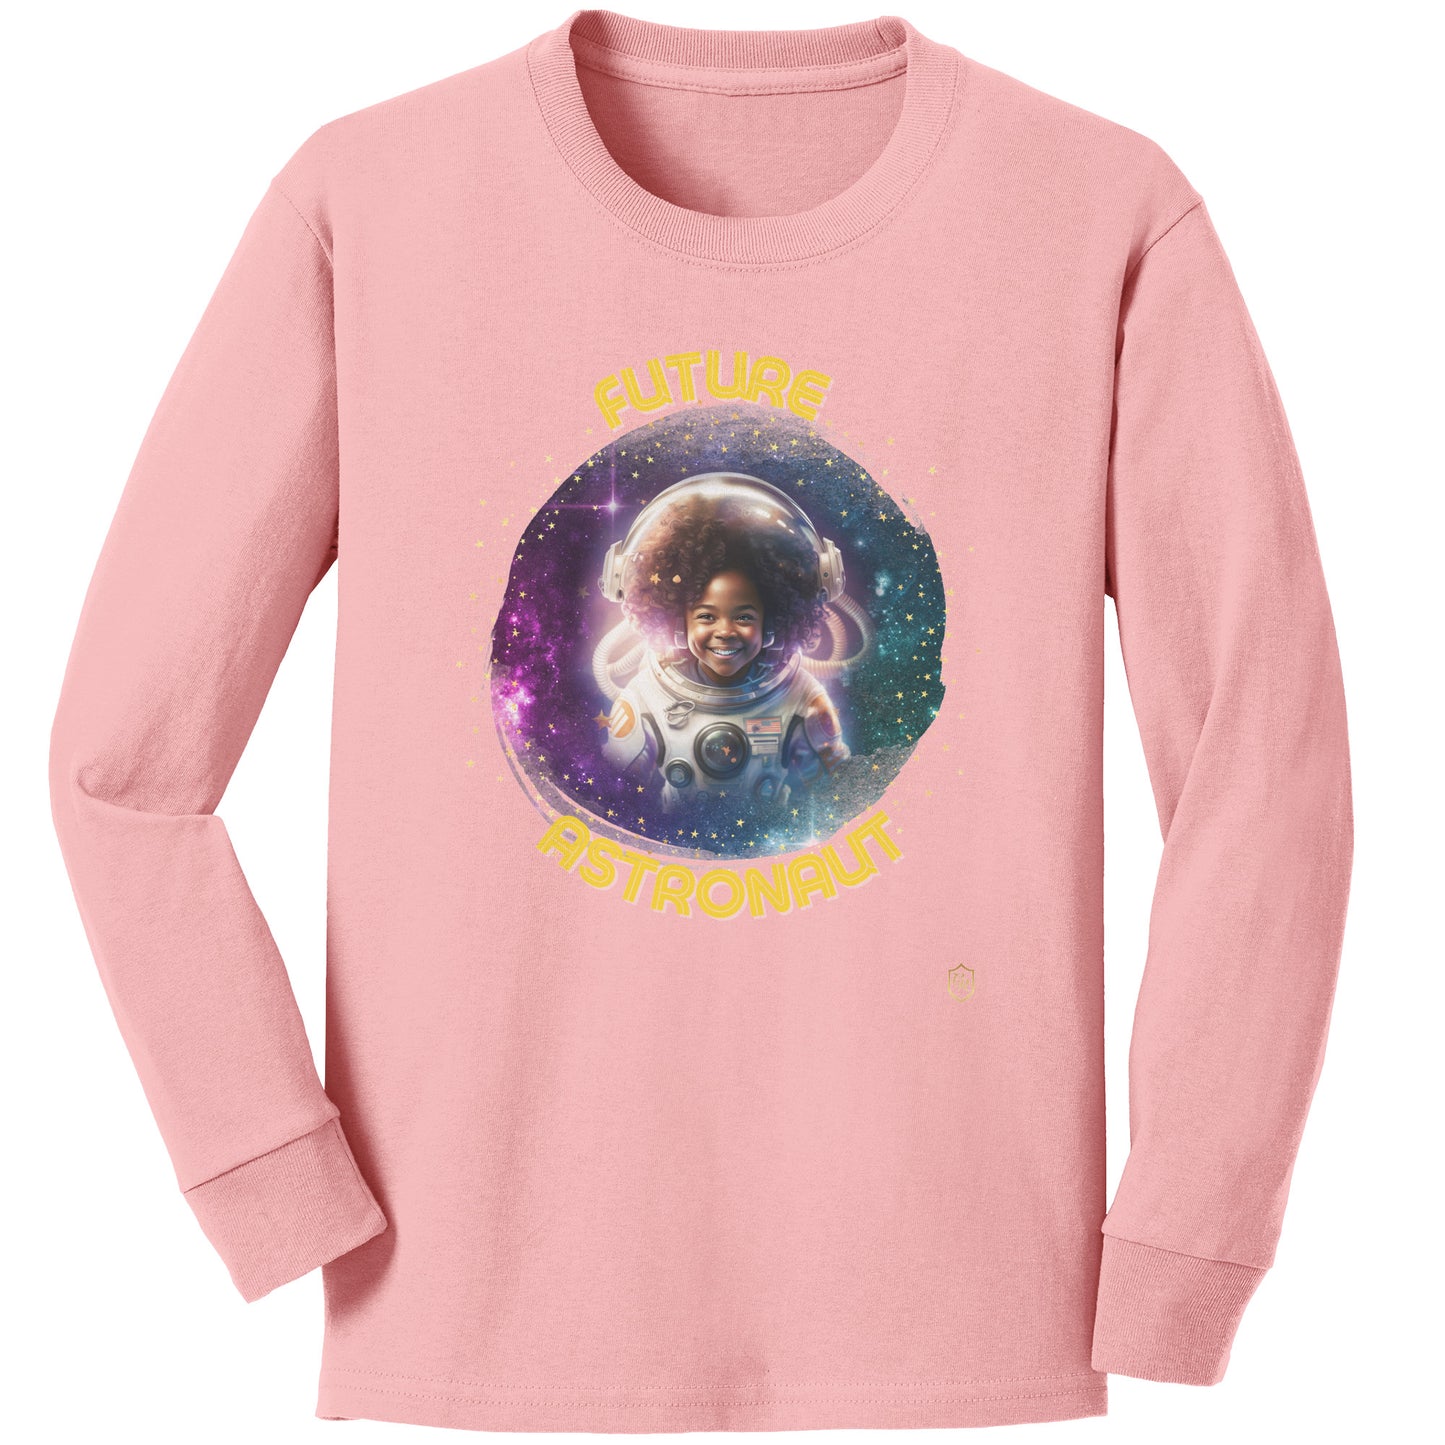 Girl's Galactic Explorer Long Sleeve T-shirt: The Official Astronaut Gear of the Future